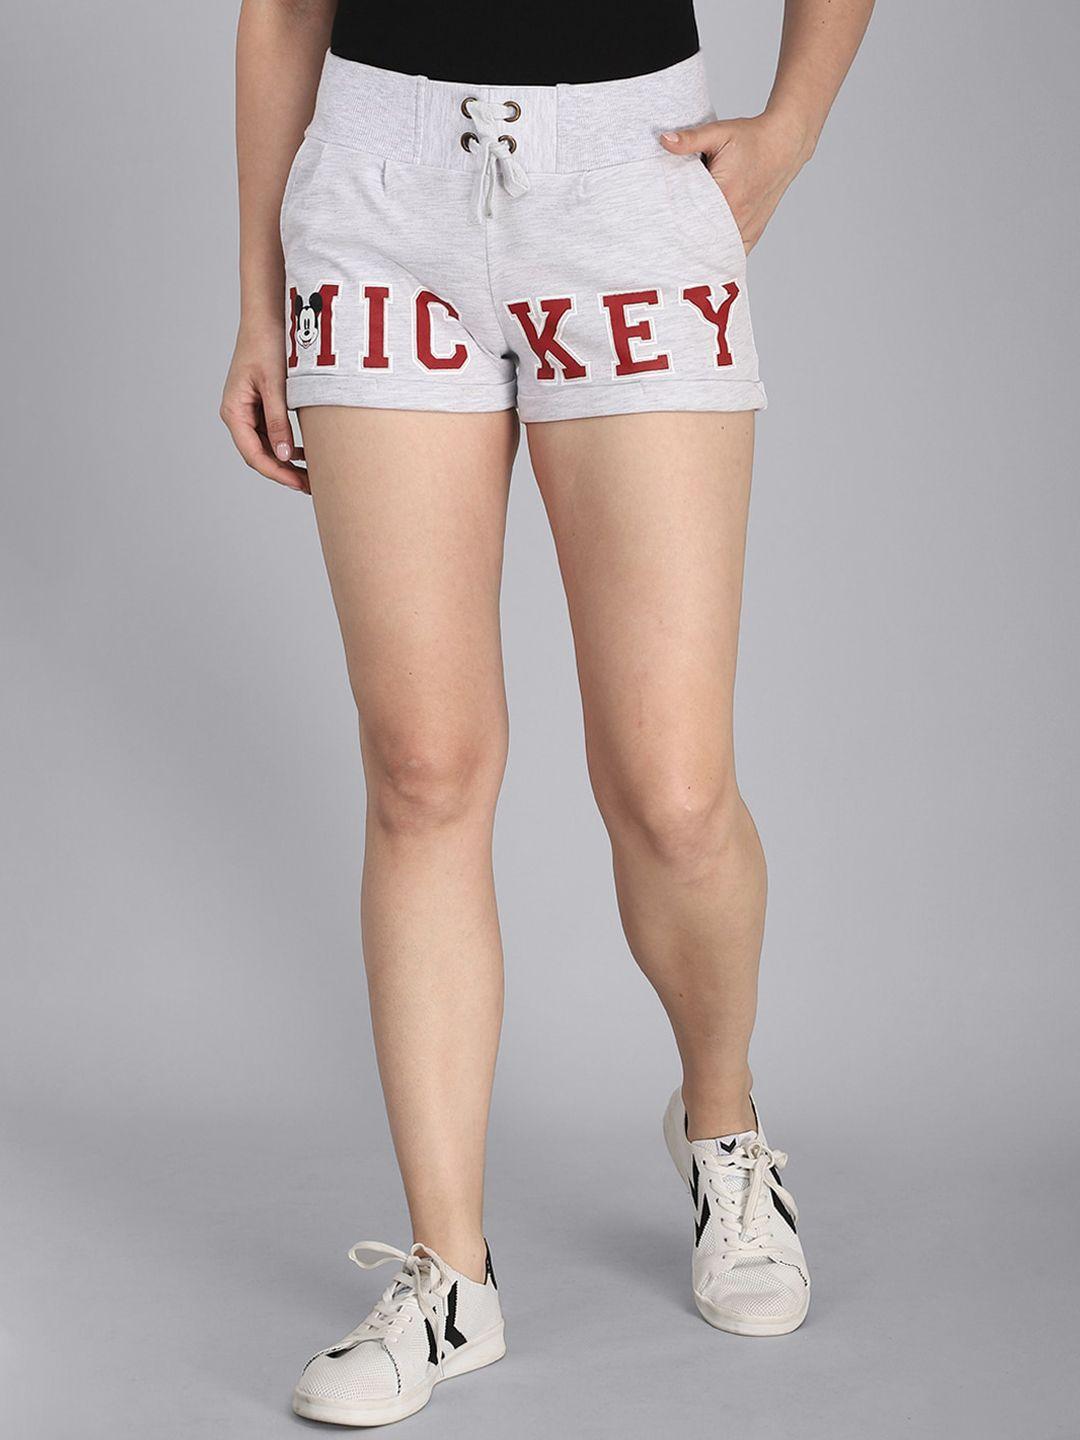 free authority women grey mickey & friends featured shorts